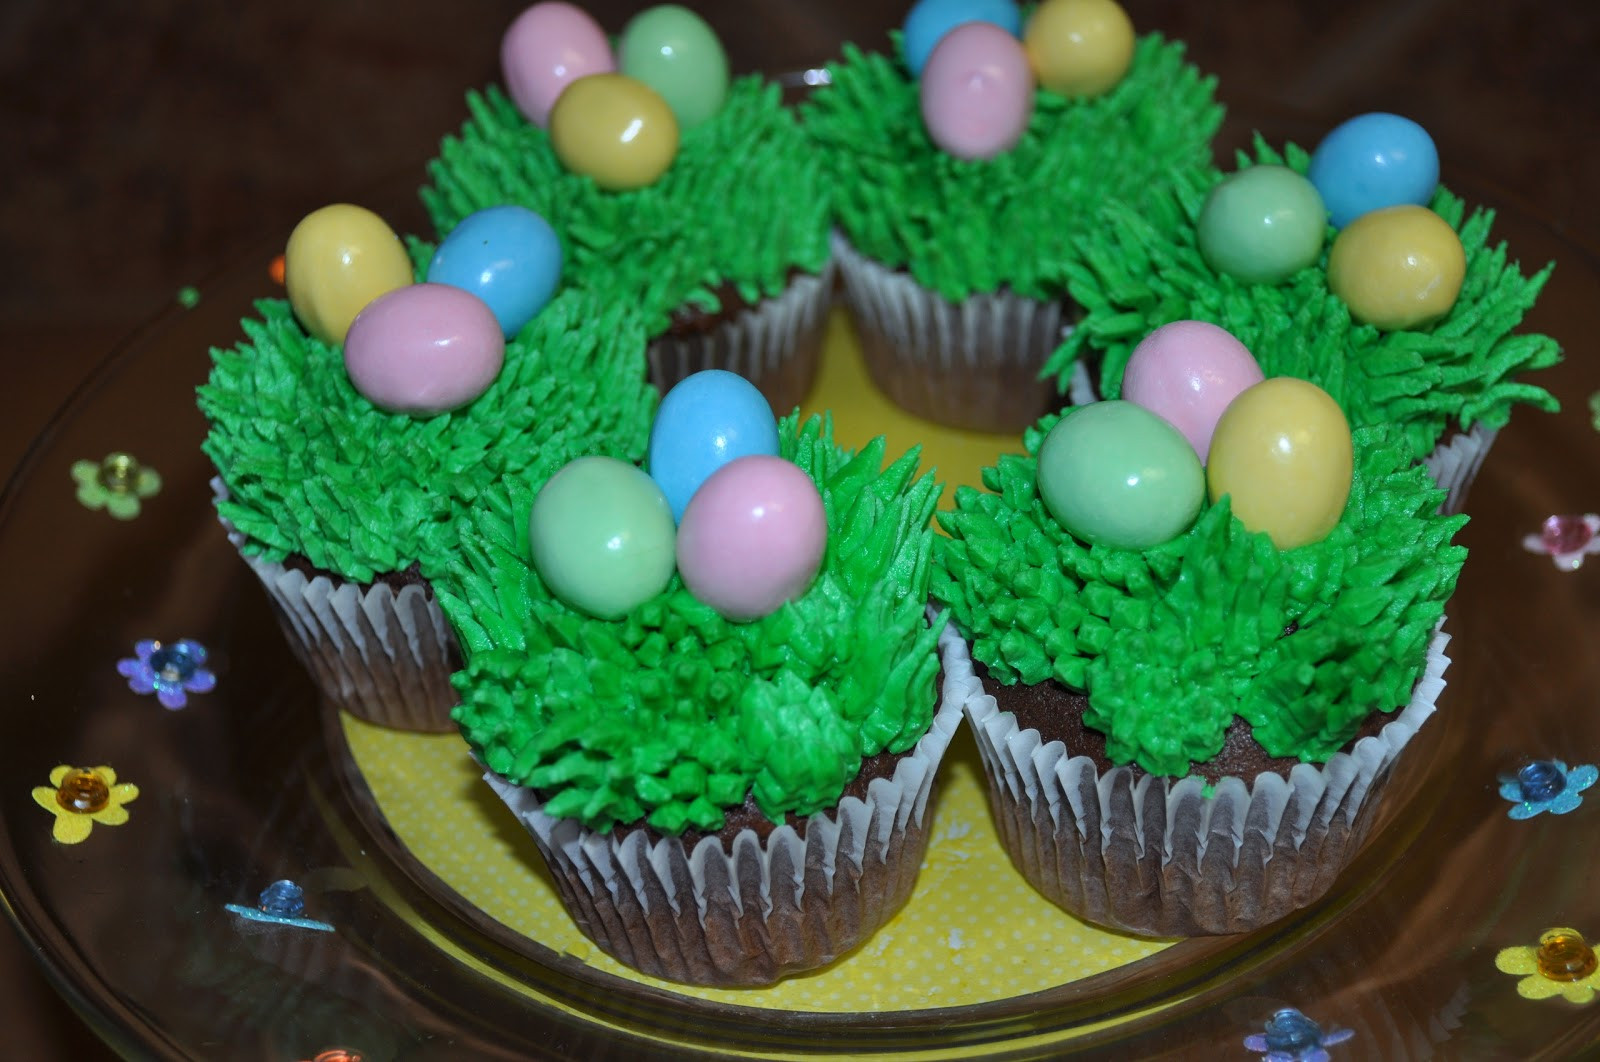 Easter Cupcake Decorating Ideas
 Morgan s Cakes Easter Cupcakes